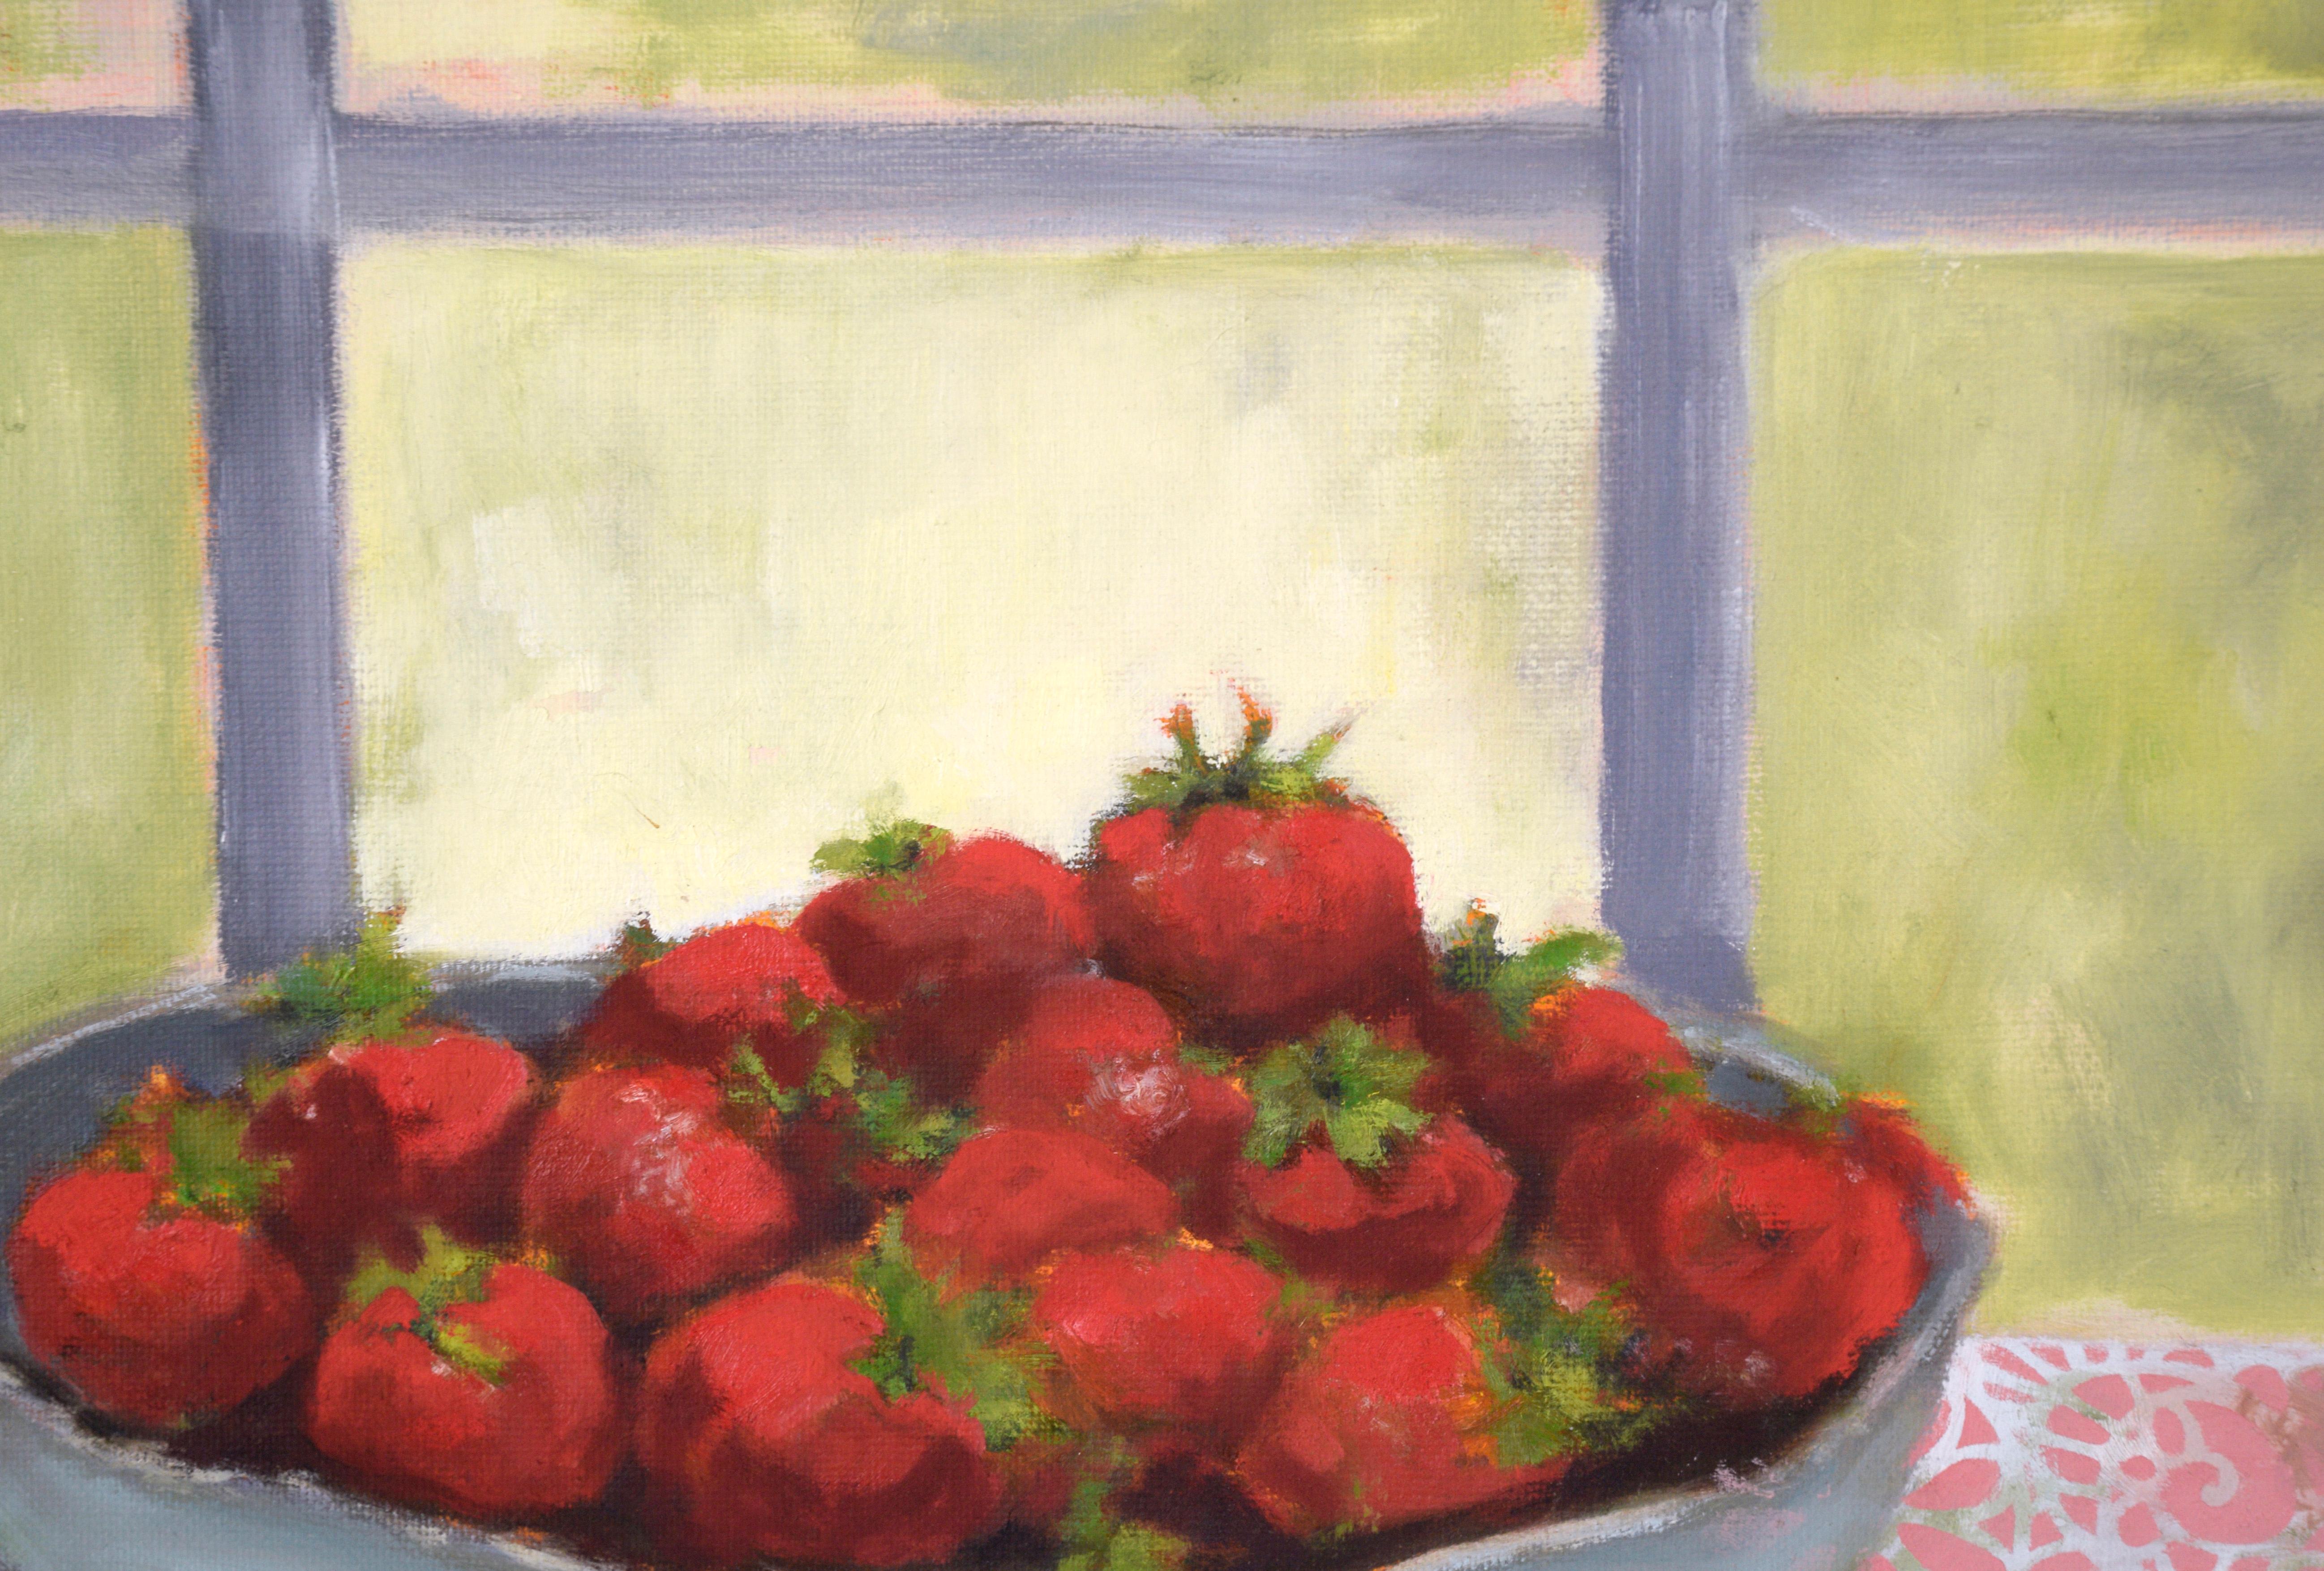 Still Life with Strawberries in Acrylic on Canvas - American Impressionist Painting by M. Pavao